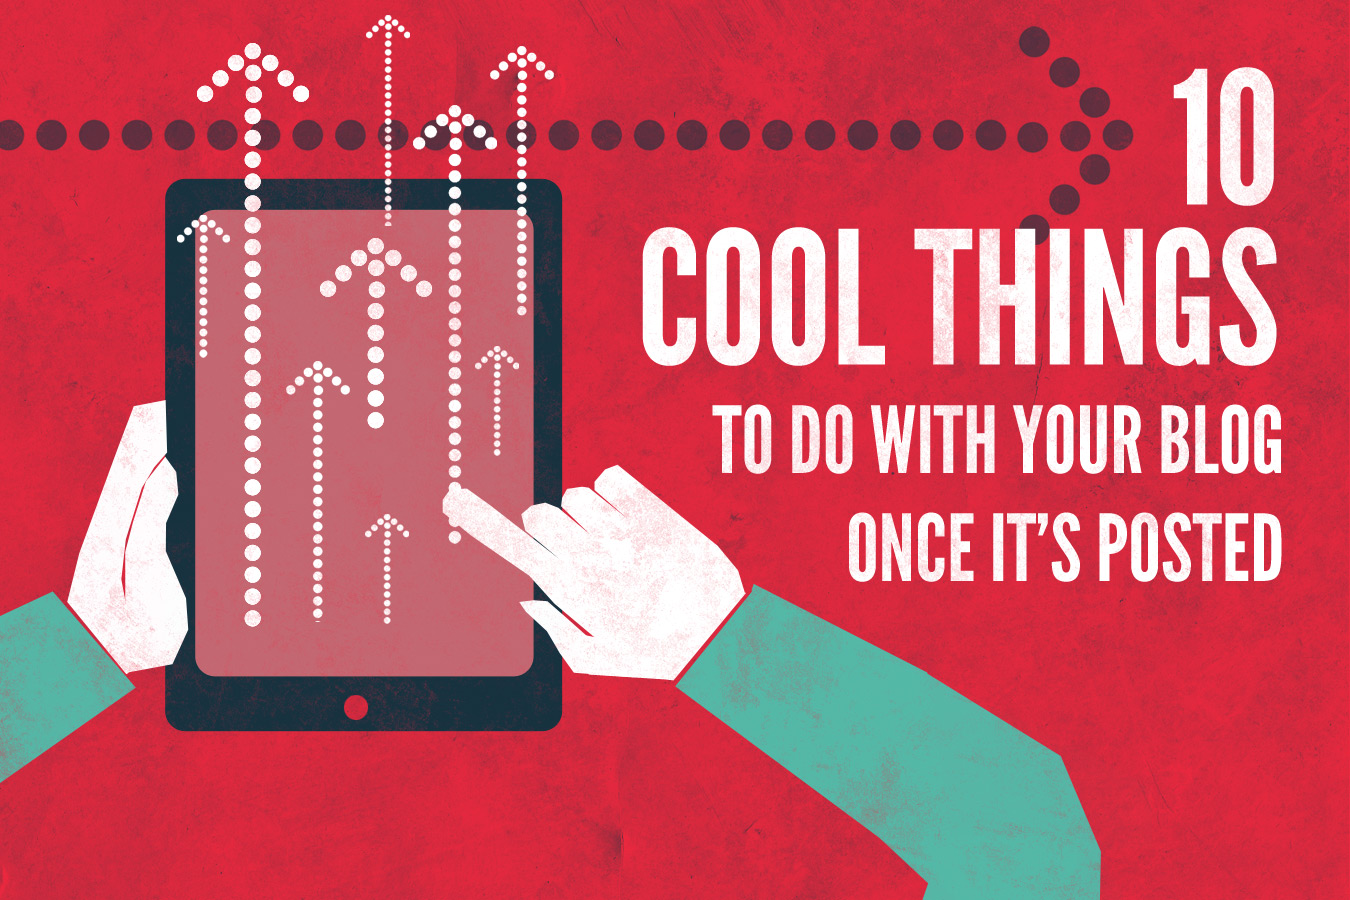 10 Cool Things to Do with your Blog Once it’s Posted